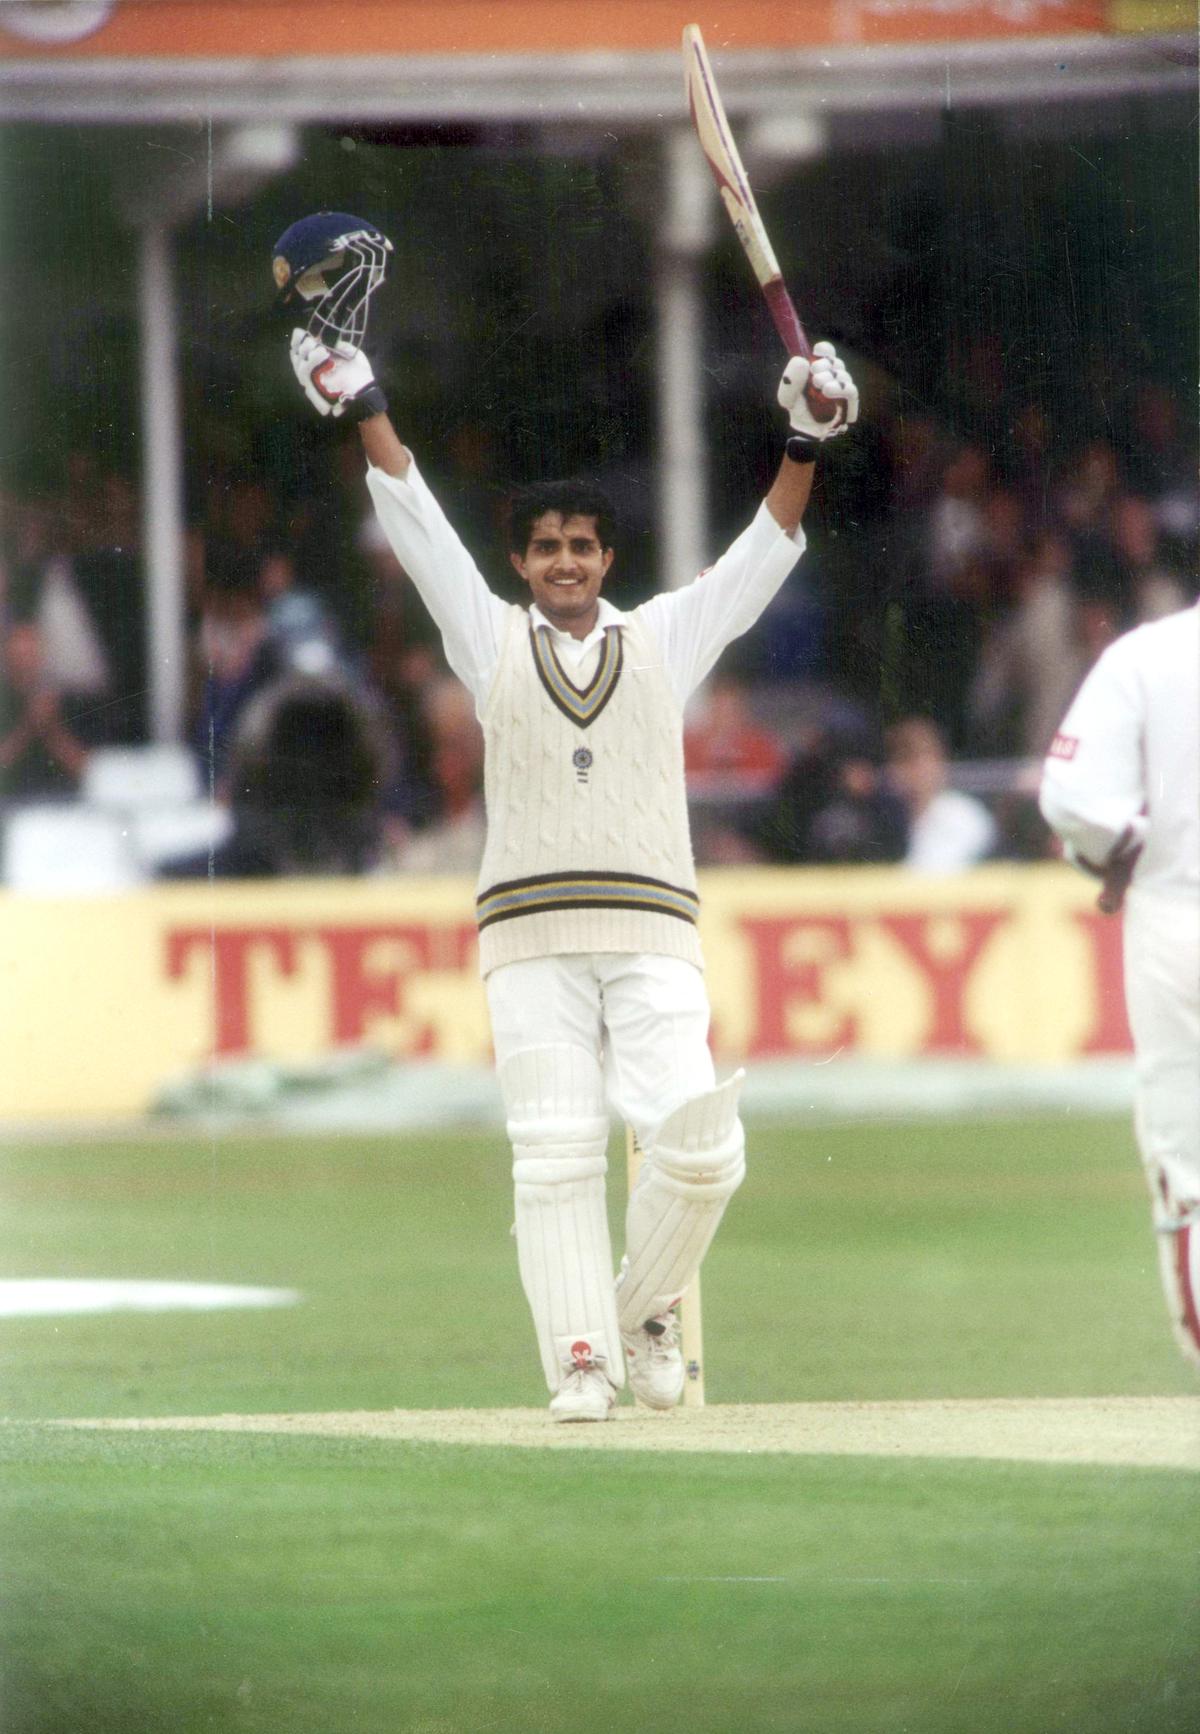 Indian batsman Sourav Ganguly raises his bat to acknowledge the crowd's cheers after scoring a century on the third day of the second test between India and England at Lords on June 22, 1996.